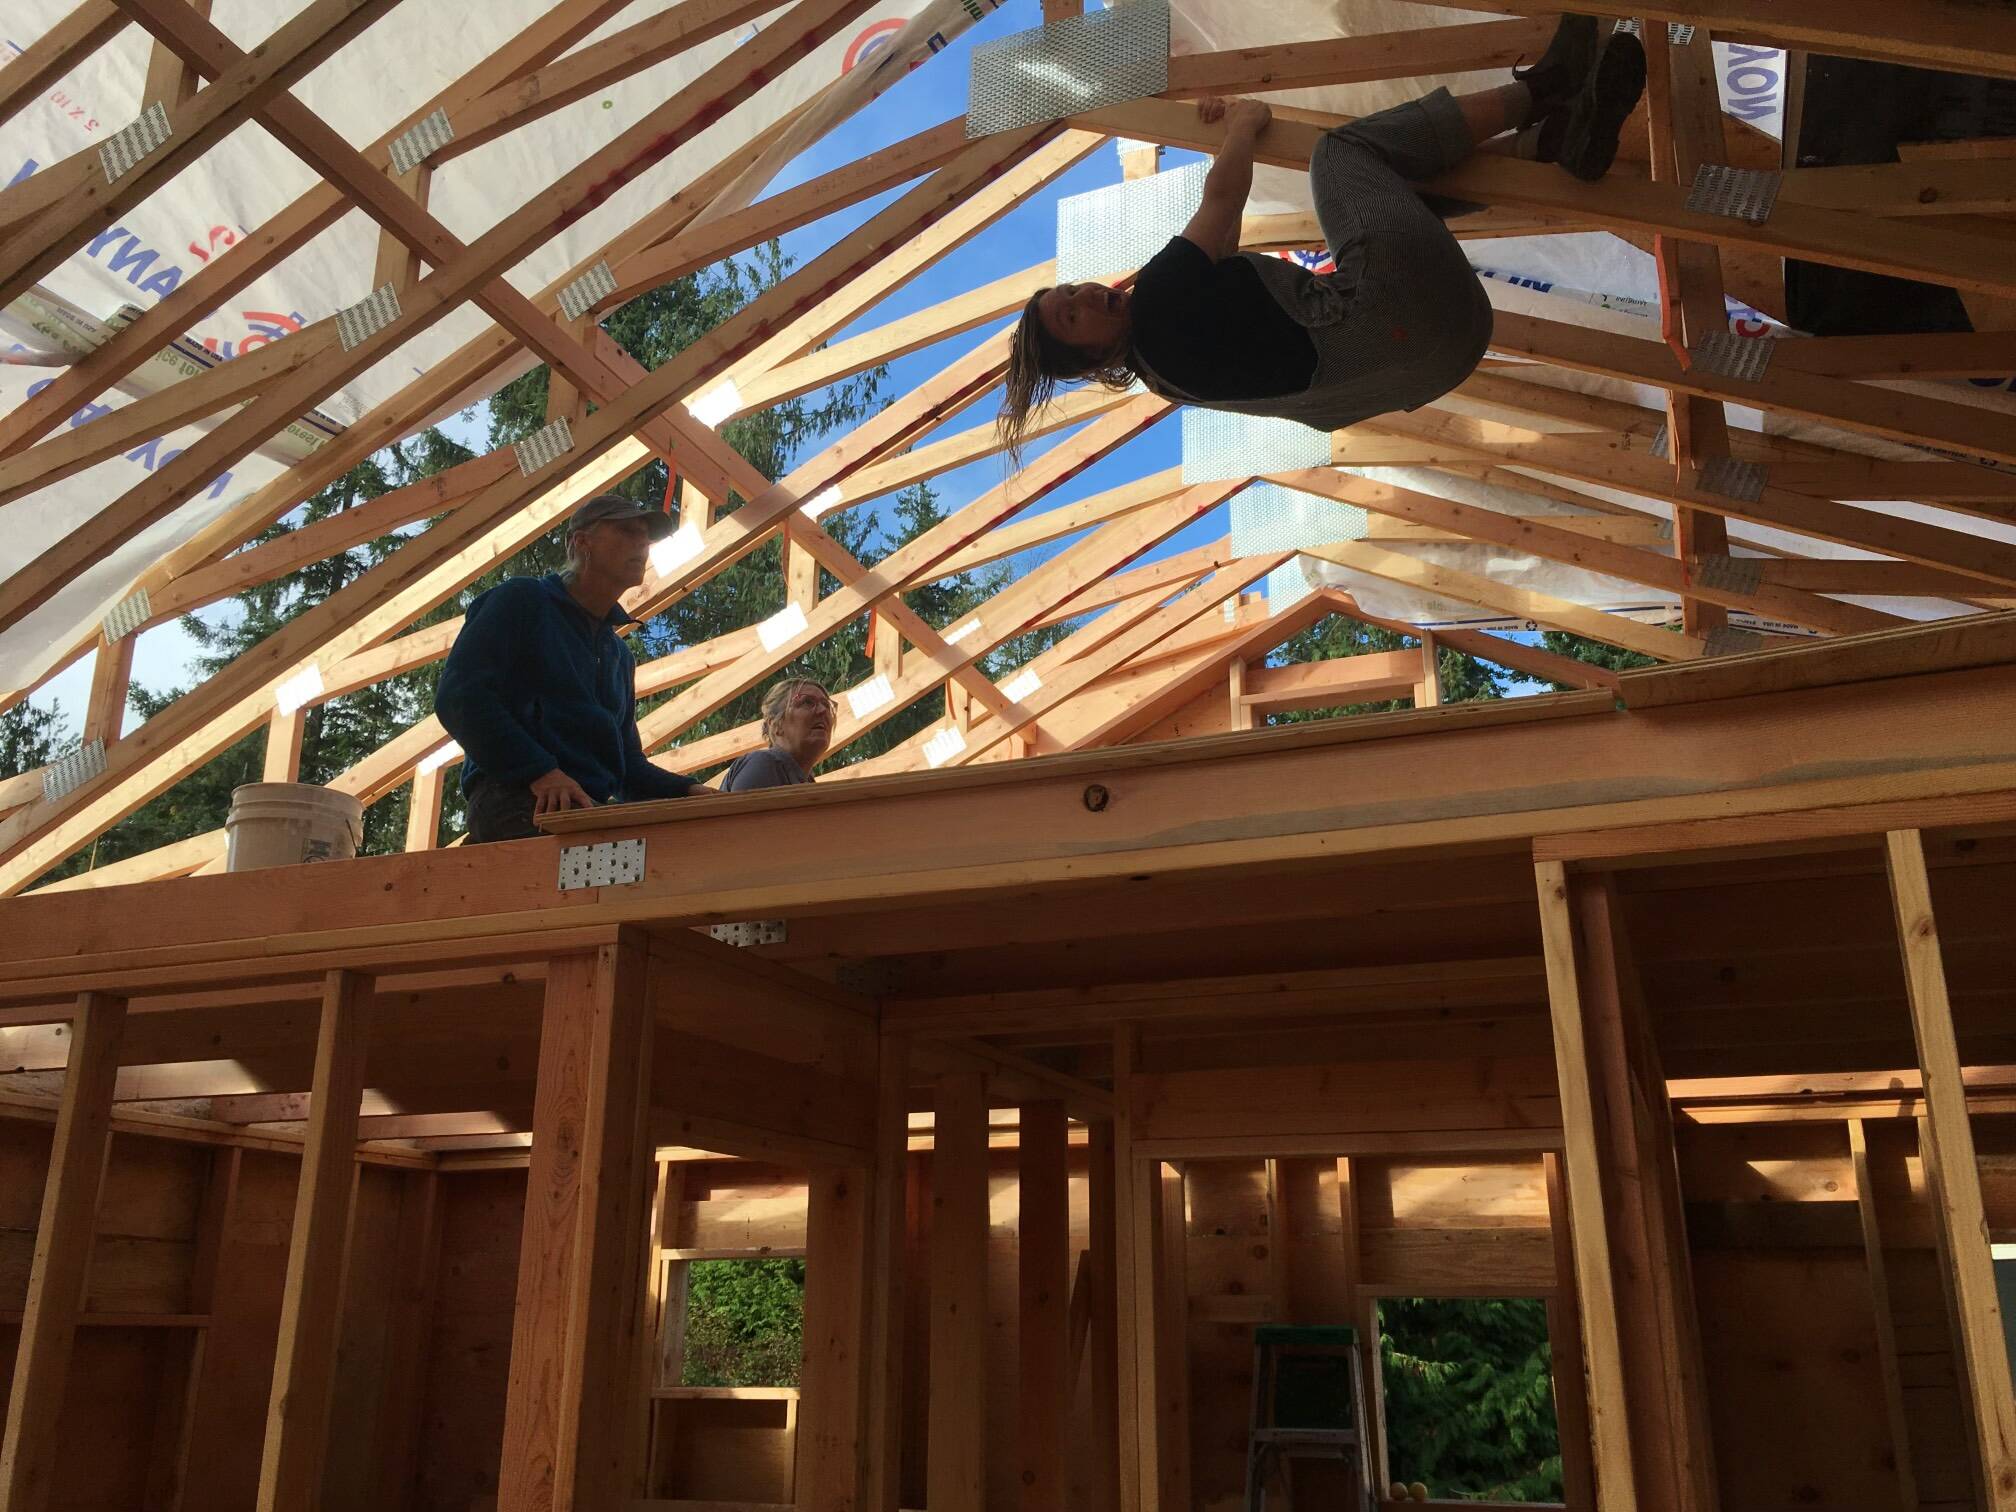 Gabbi Korrow hangs from the rafters during construction of her home. (Photo provided)